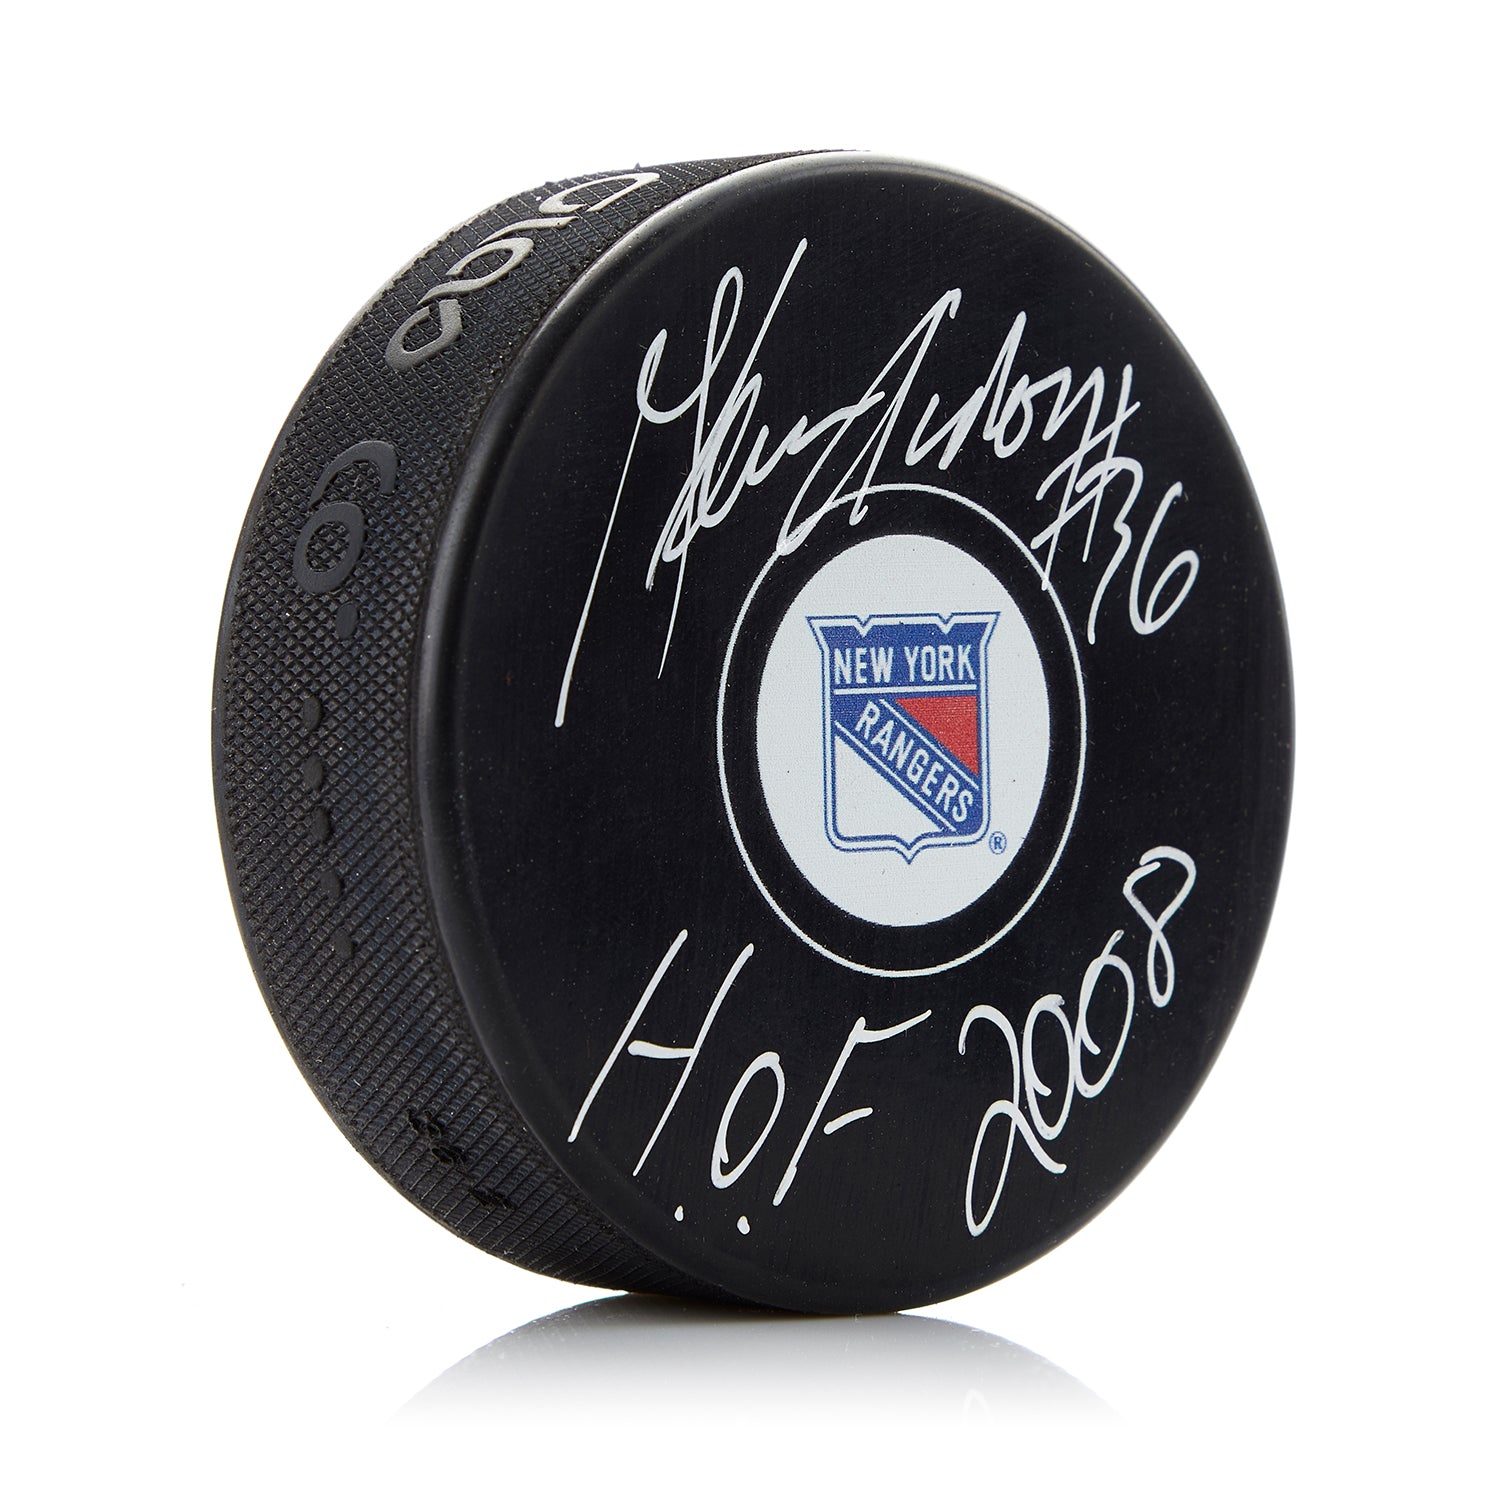 Glenn Anderson New York Rangers Signed Hockey Puck with HOF Note